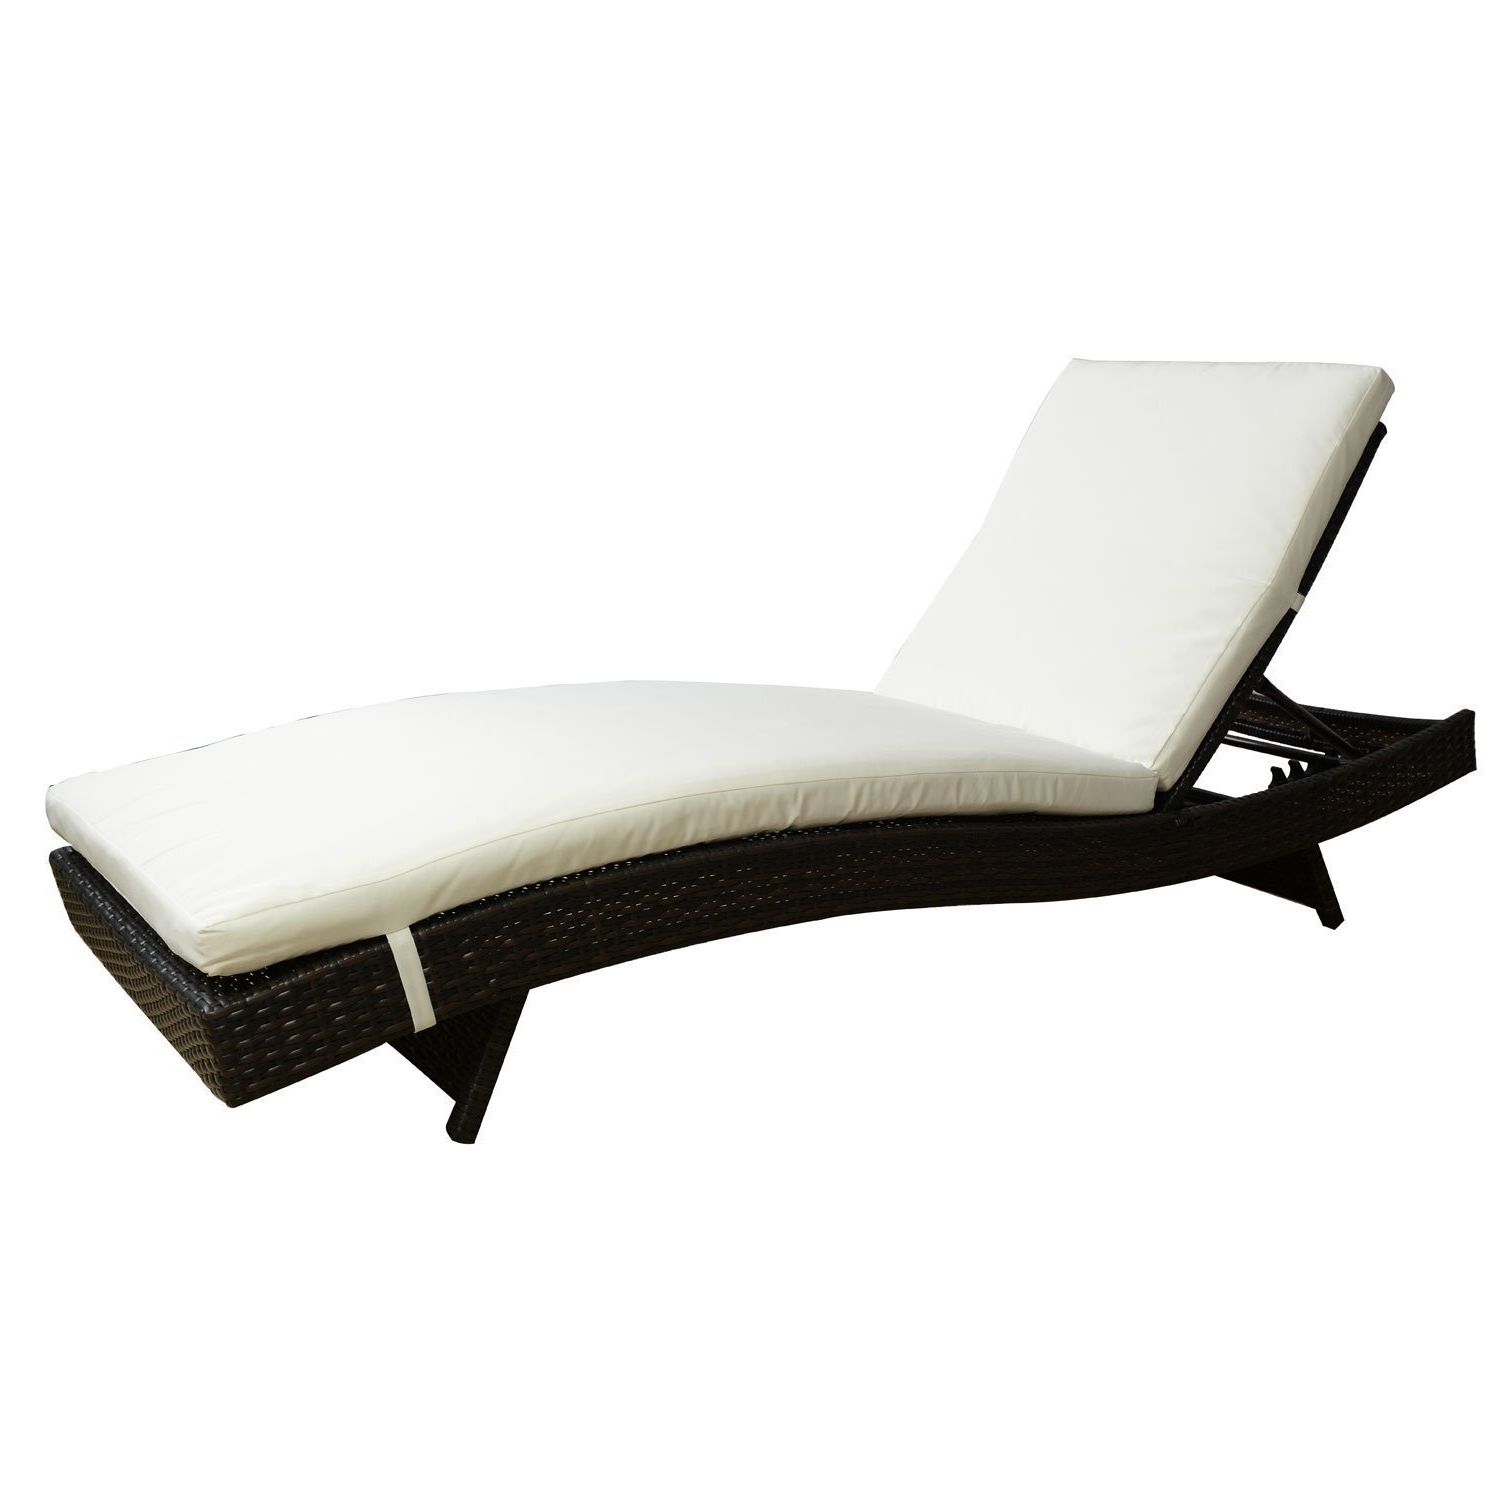 Keter Chaise Lounge Chairs Within Most Recently Released Amazon: Tangkula Adjustable Pool Chaise Lounge Chair Outdoor (View 15 of 15)